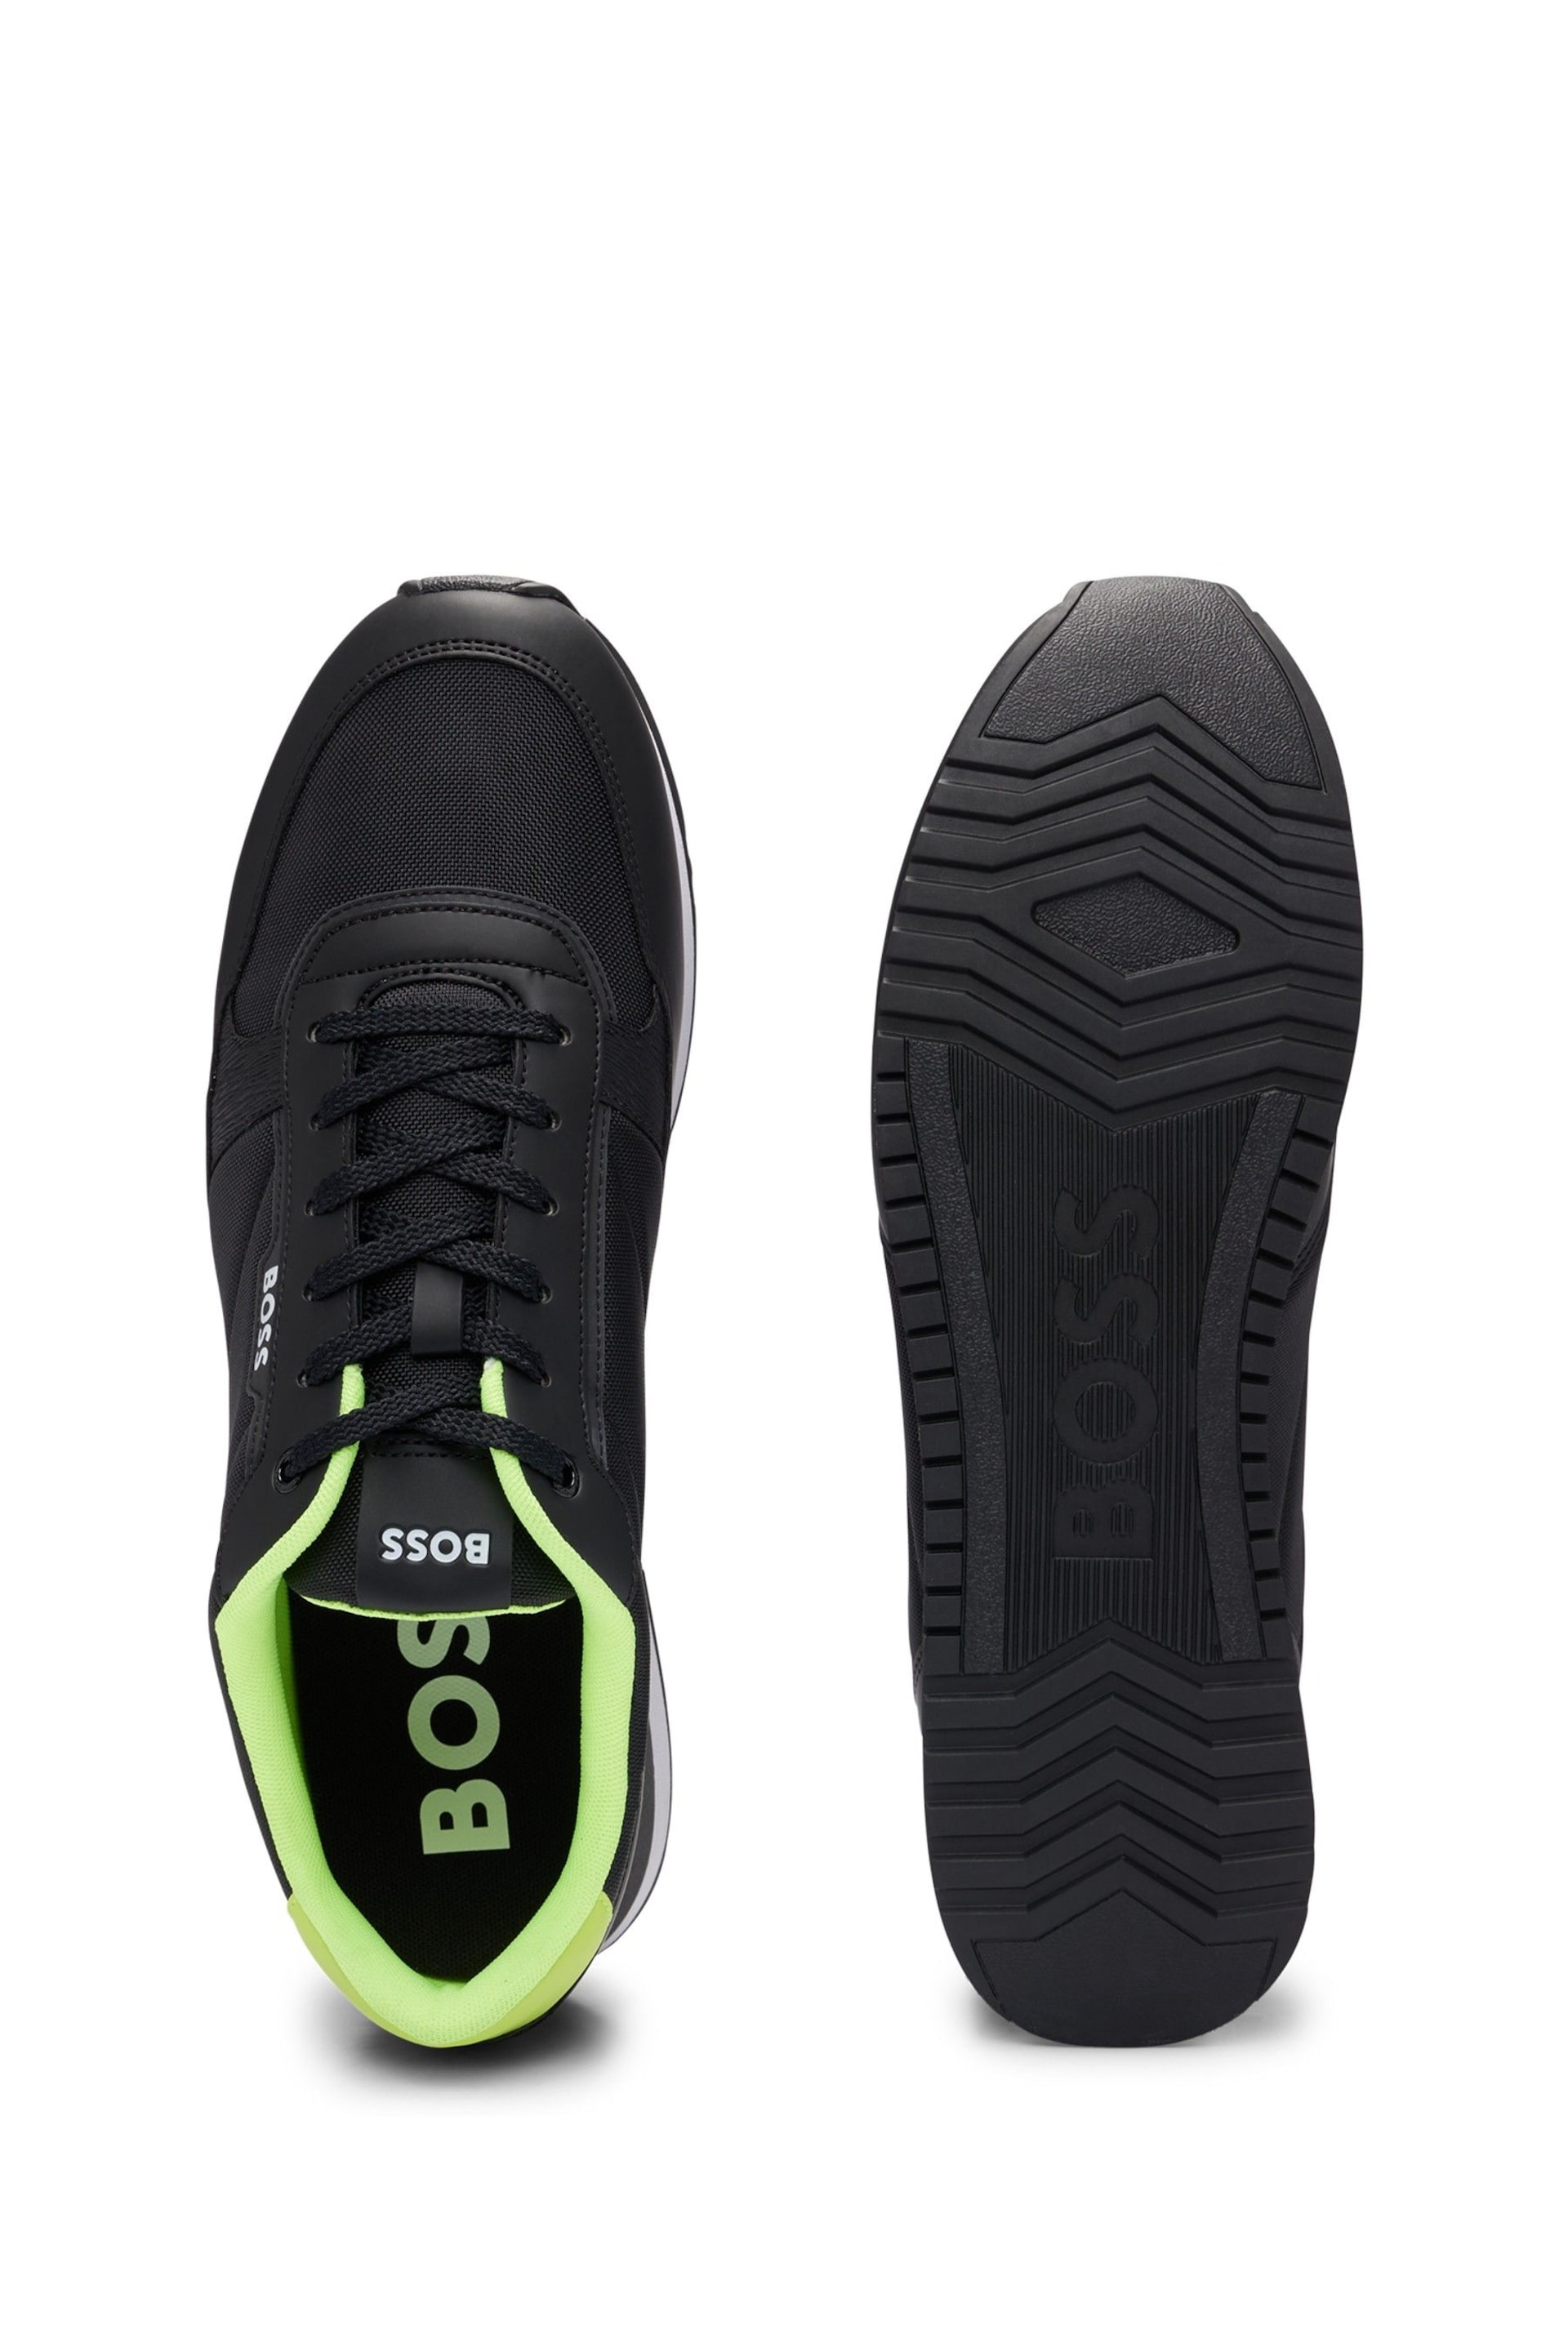 BOSS Black Mixed-Material Trainers With Pop-Colour Details - Image 3 of 5